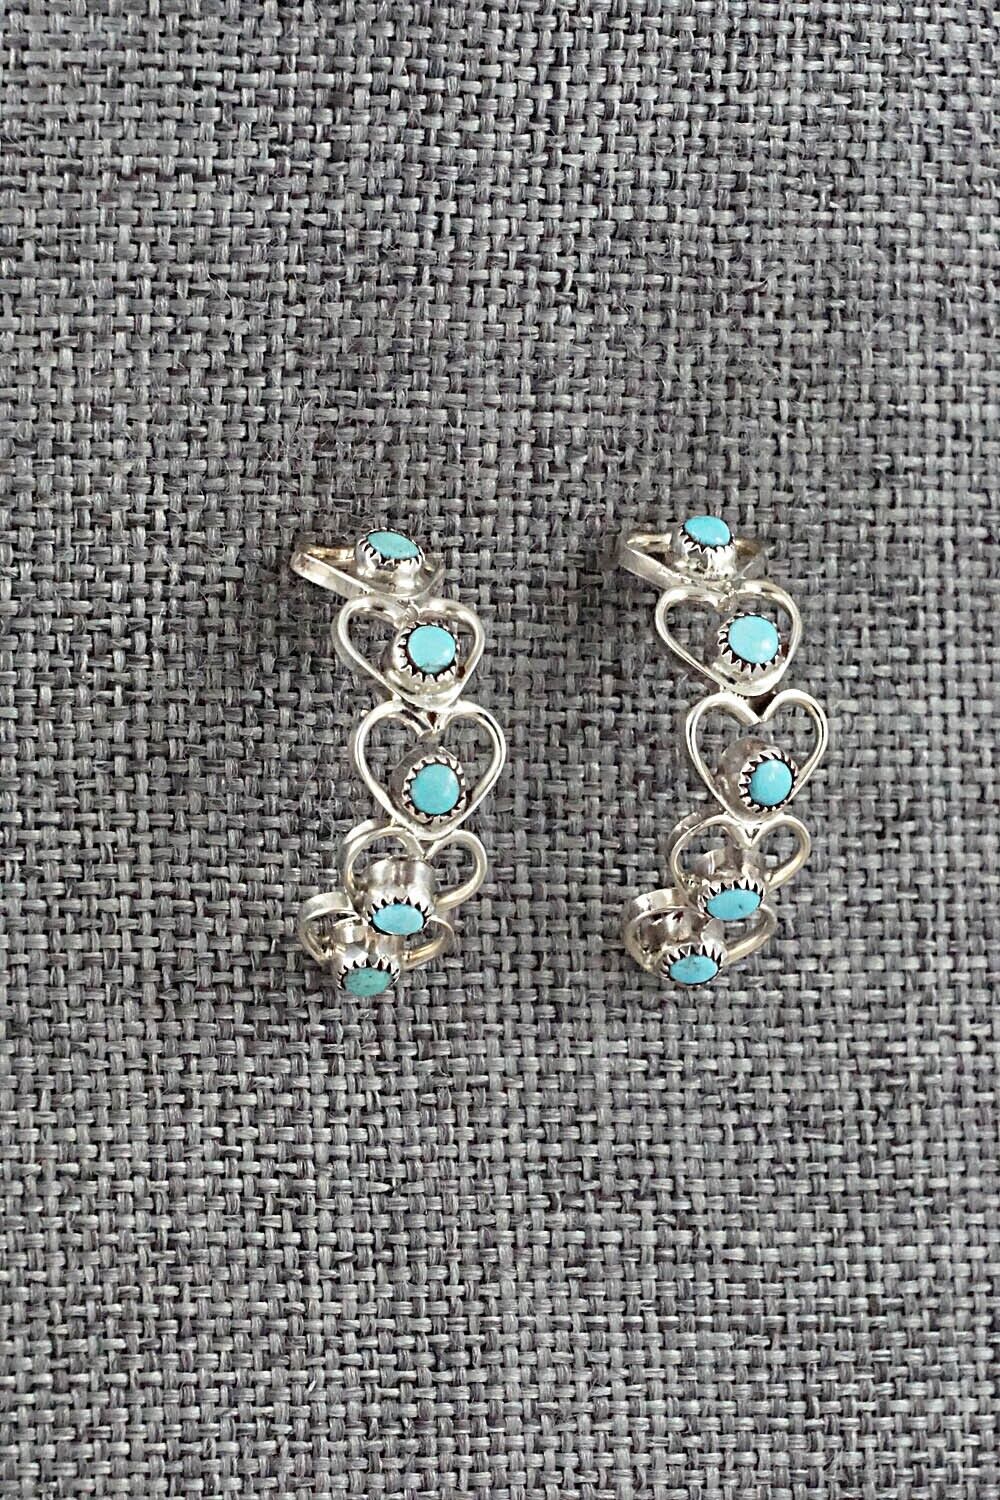 Turquoise & Sterling Silver Earrings - Hazel Pablito